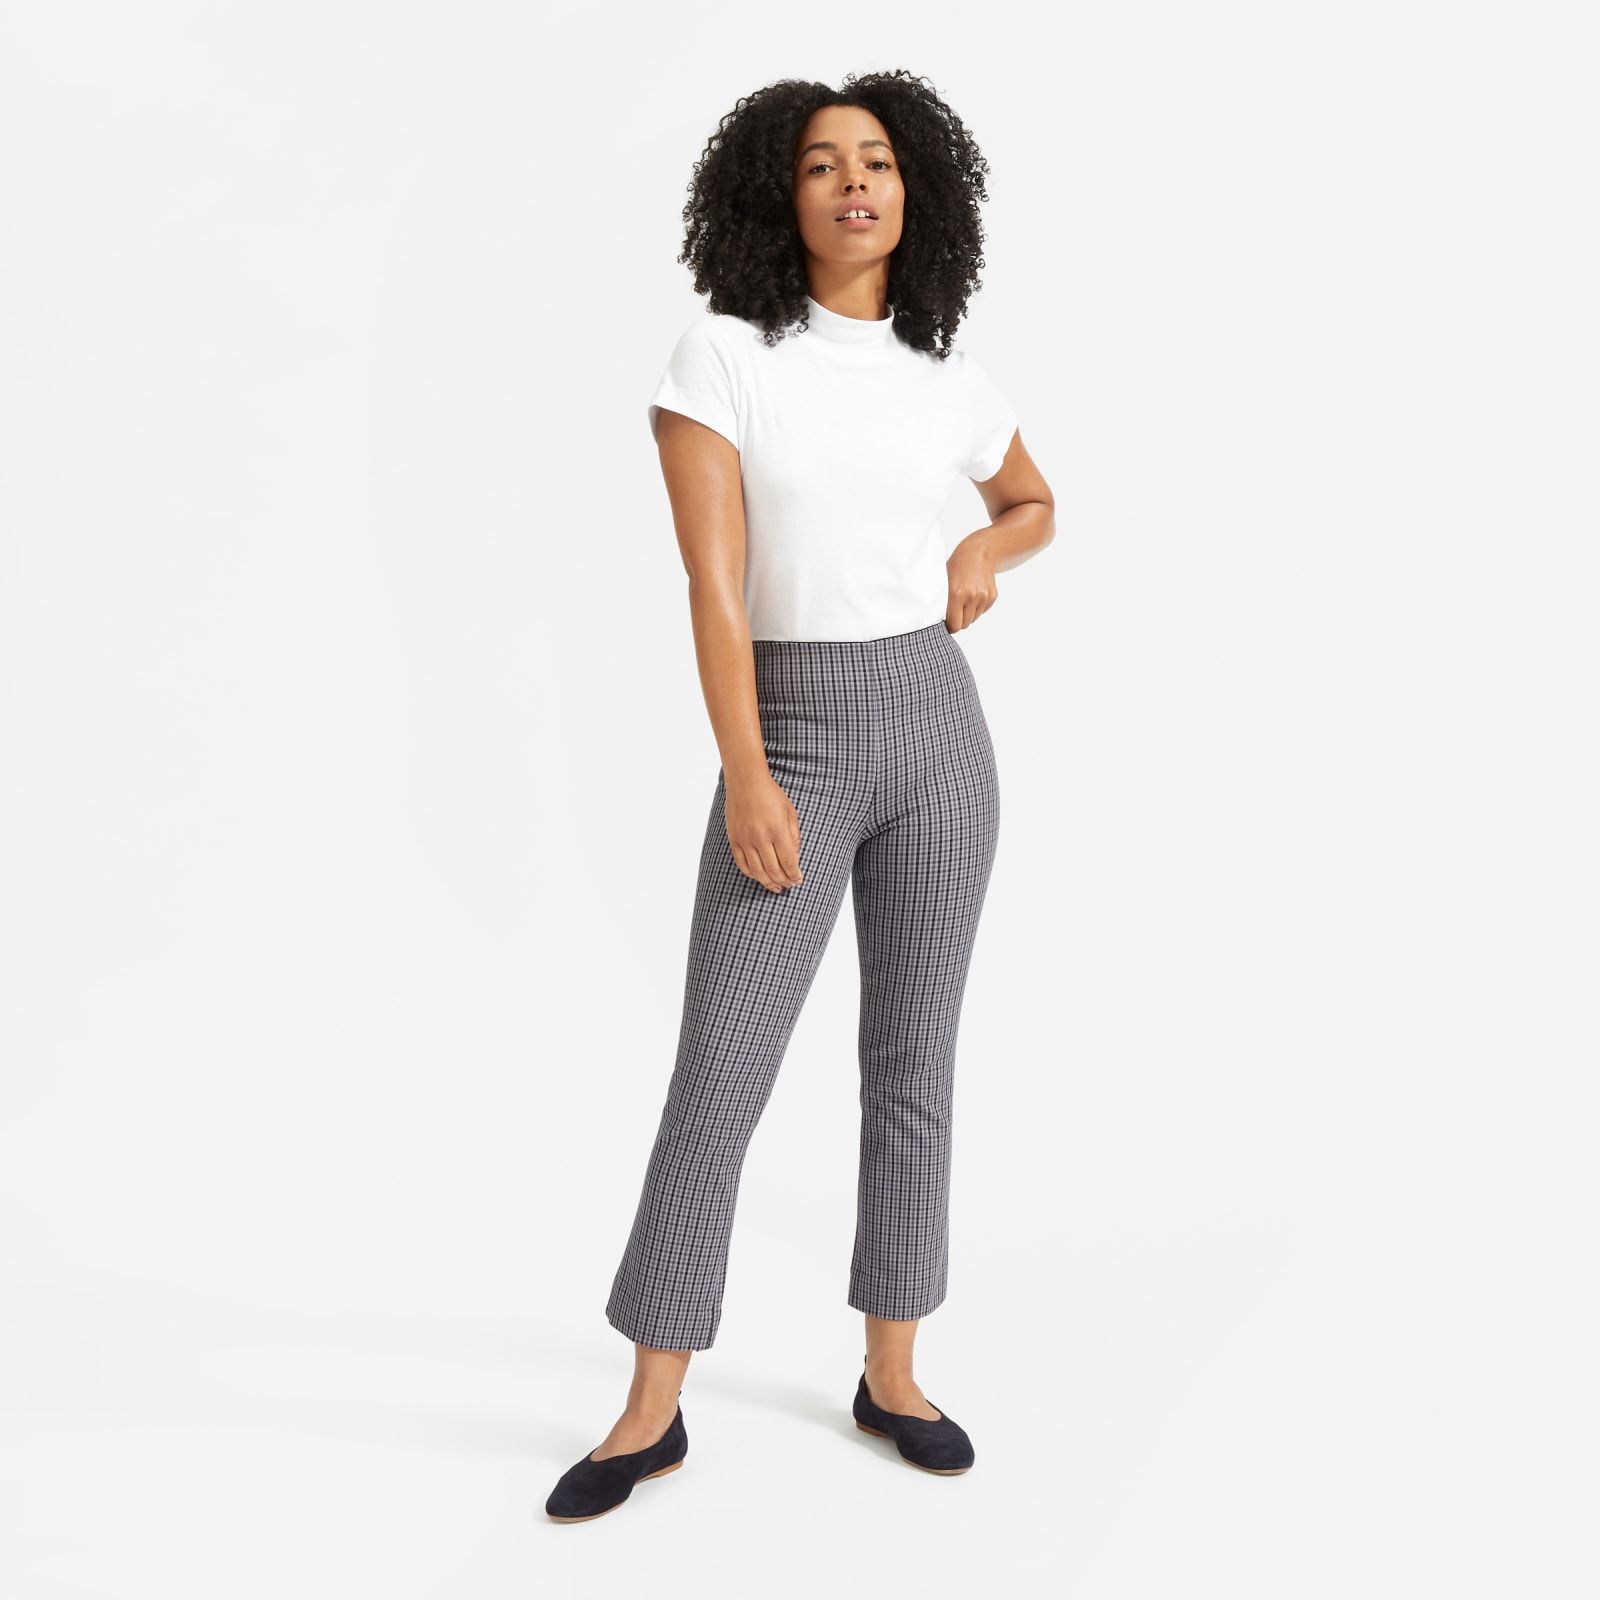 Women's High Rise Skinny Crop Raw Hem Jean by Everlane in Shale Check, Size 16 | Everlane